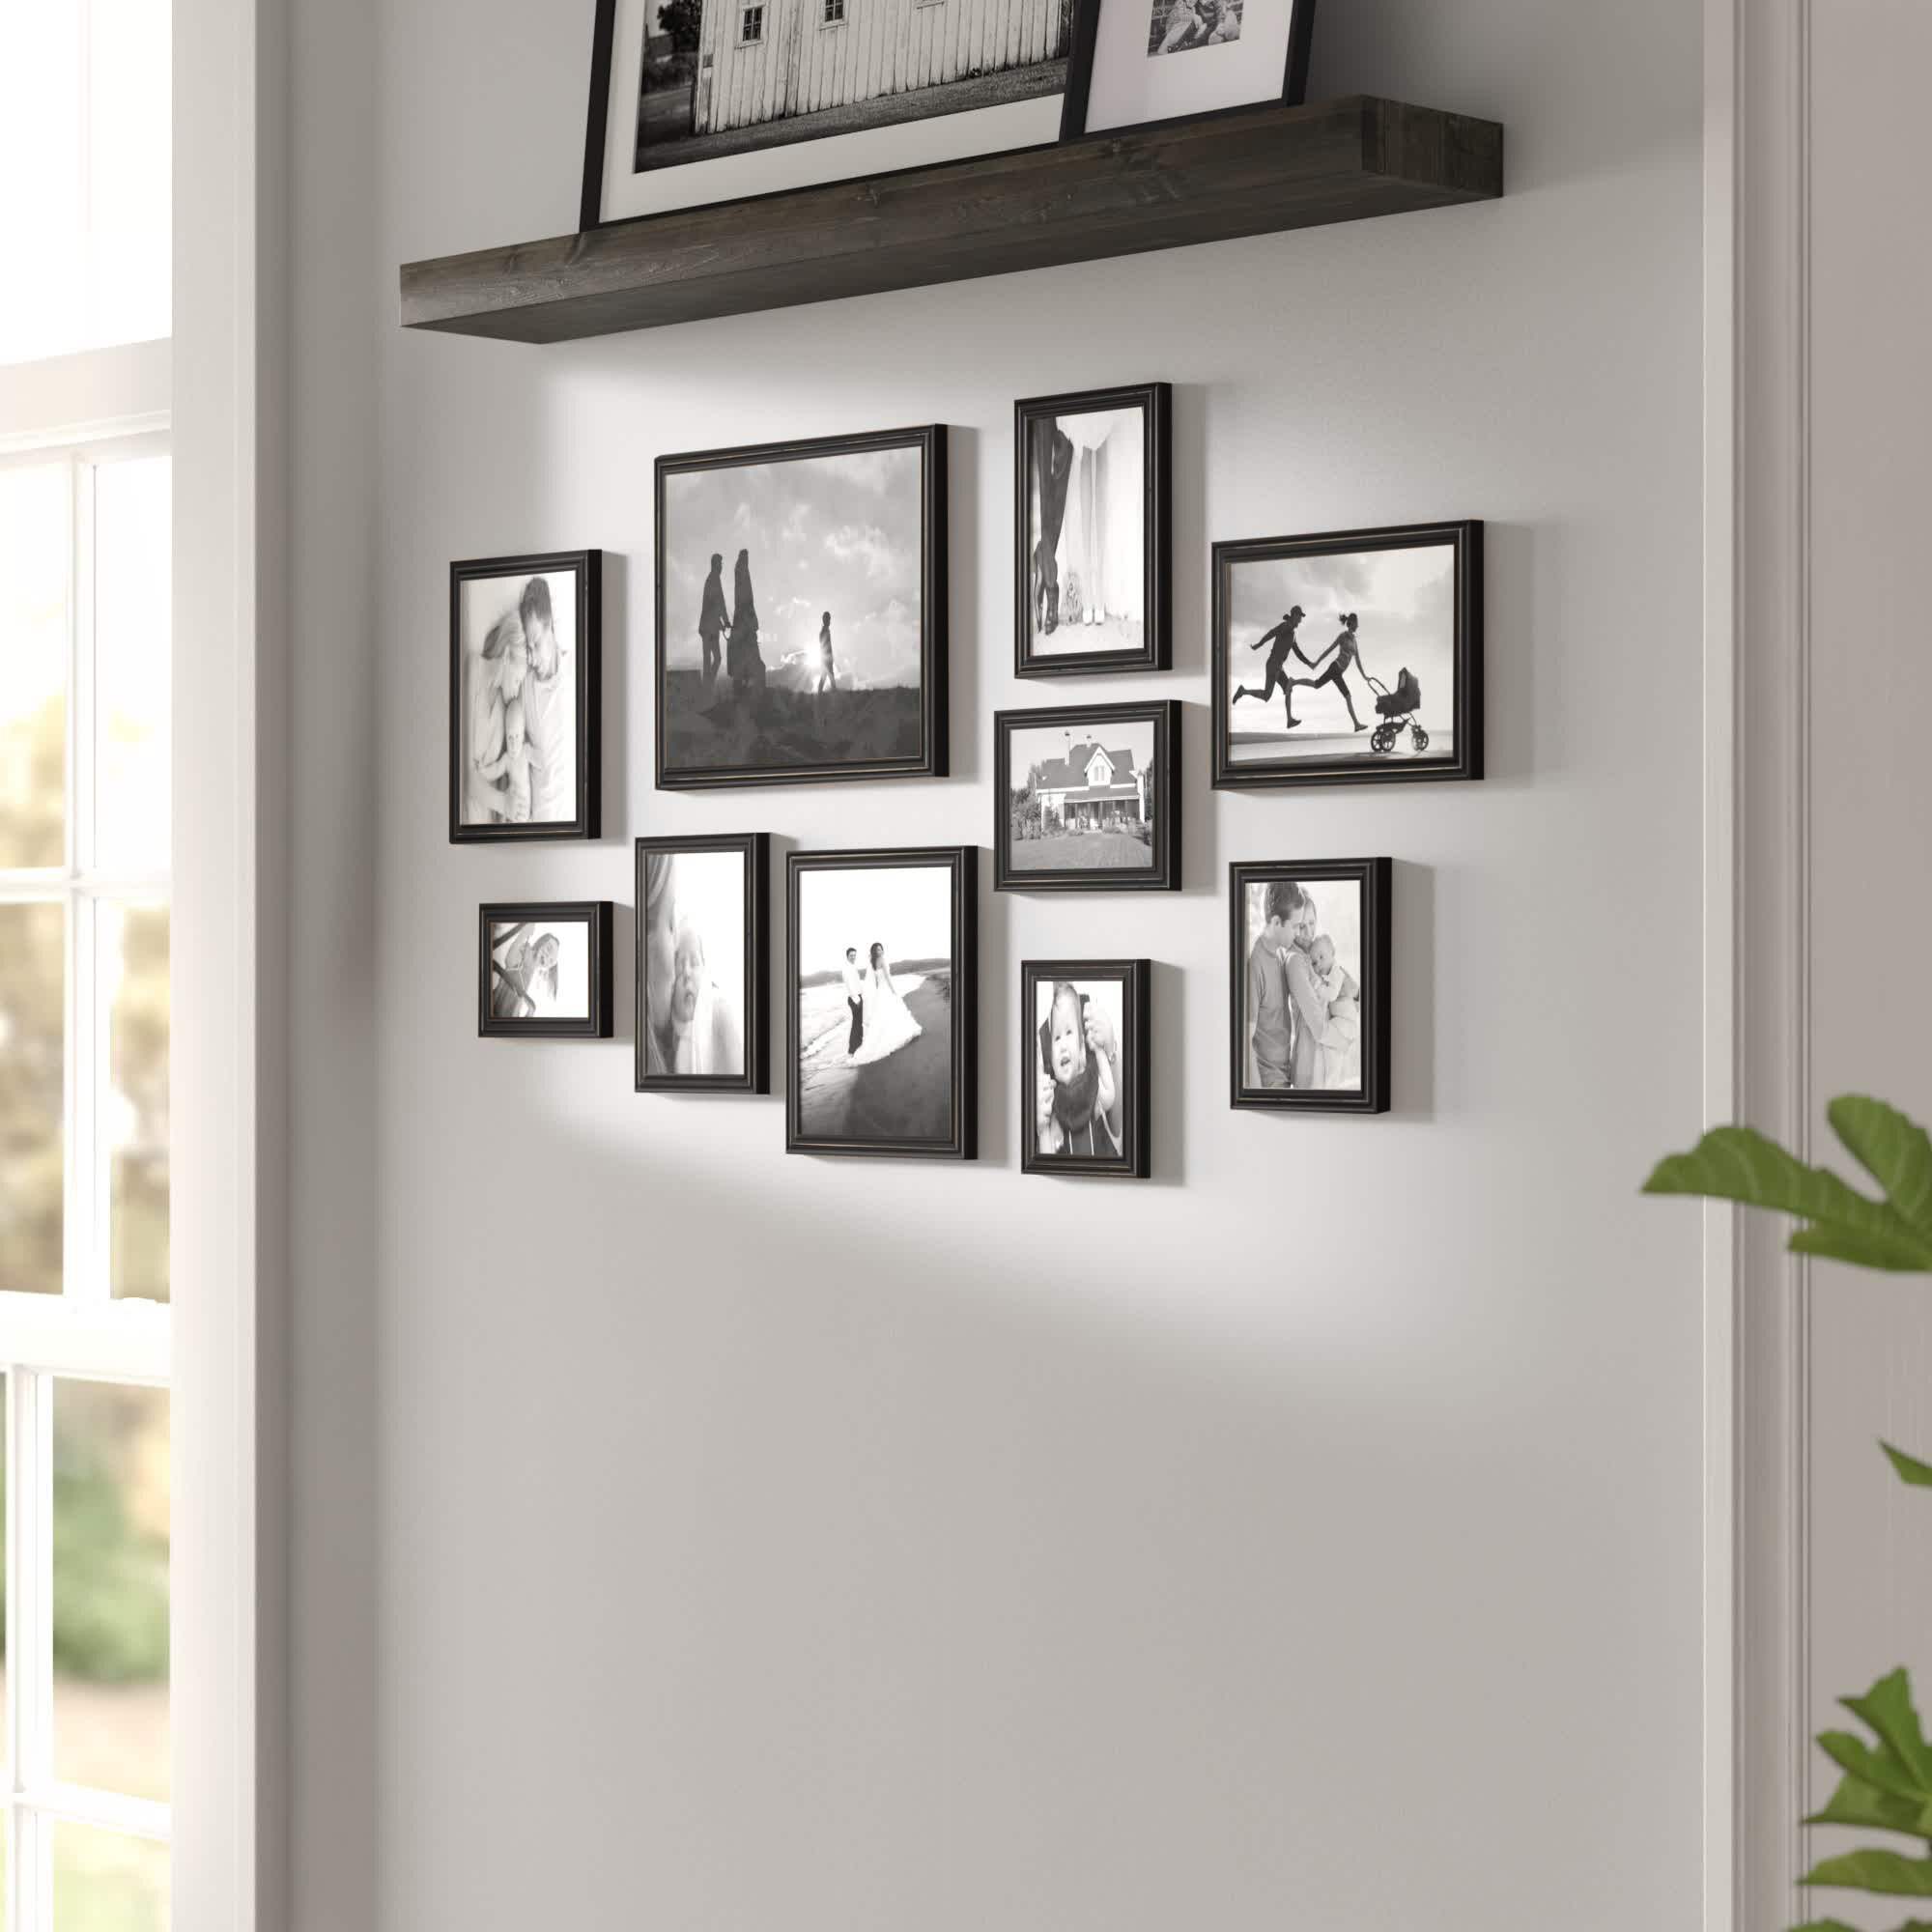 Affordable frames for hanging art at home - Curbed